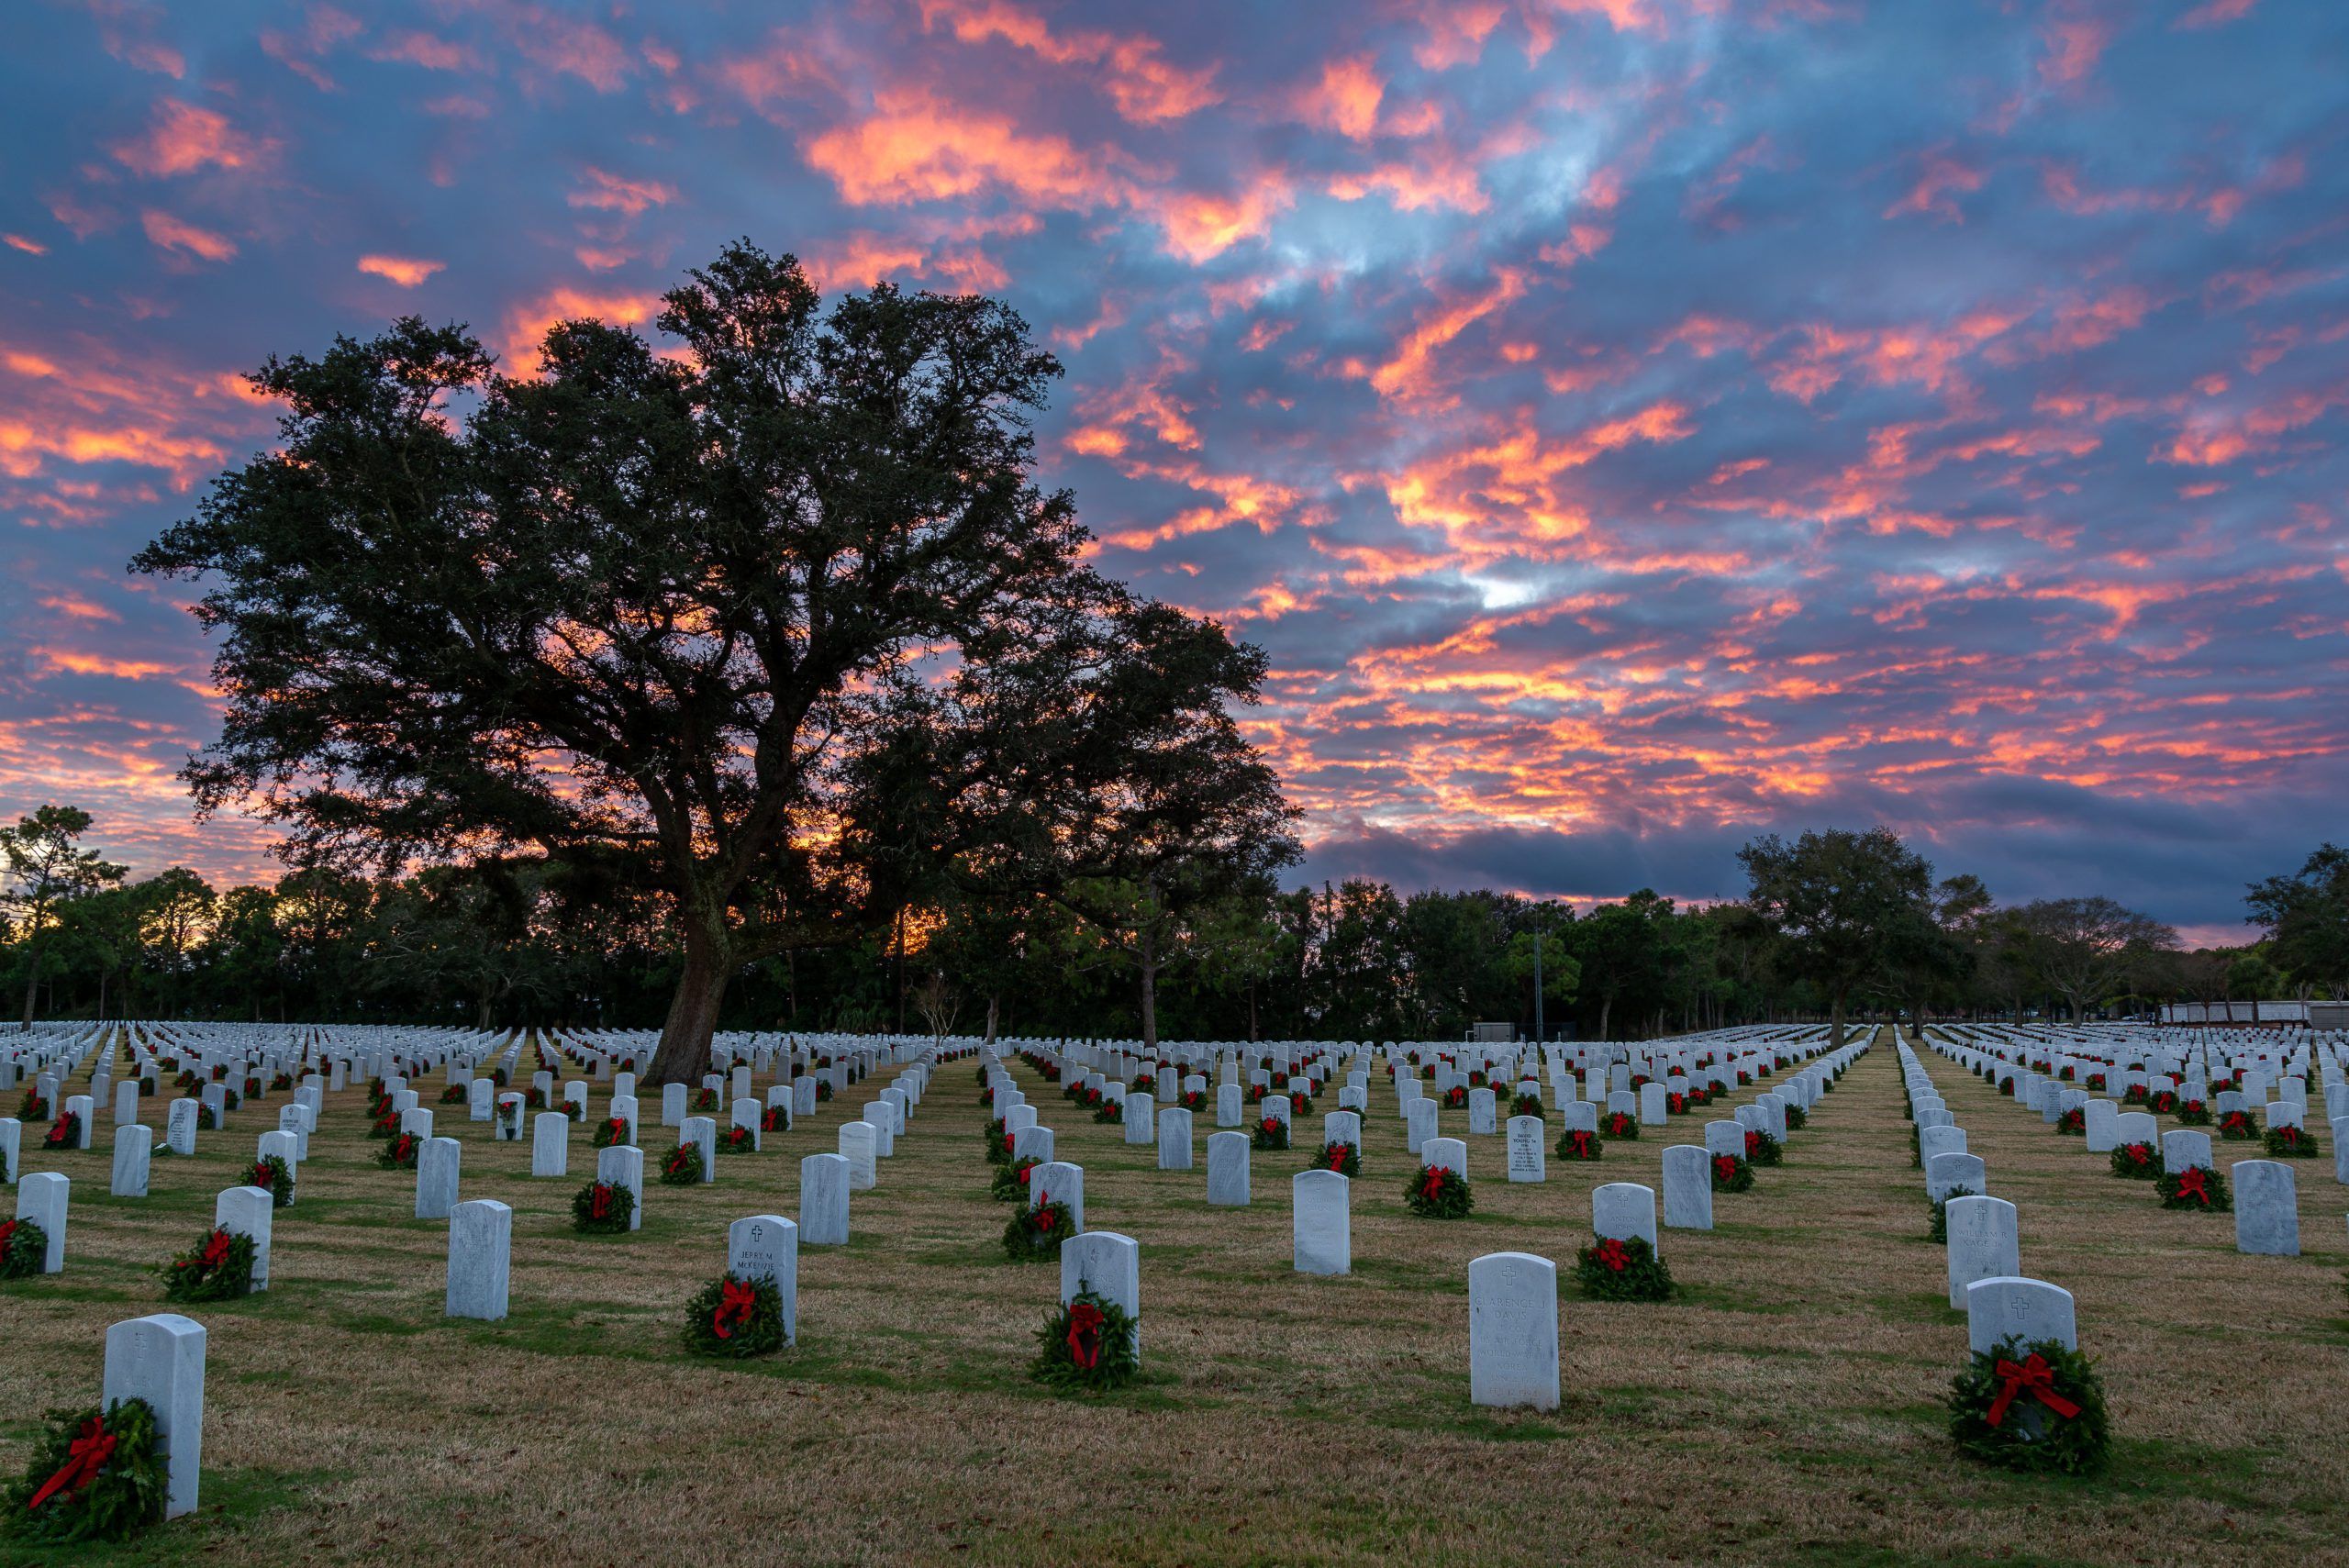 Today's Photo of the Day comes from Kevin Lehmann. Kevin took this stunning photo Tuesday evening at the Barrancas National Cemetery at NAS Pensacola.